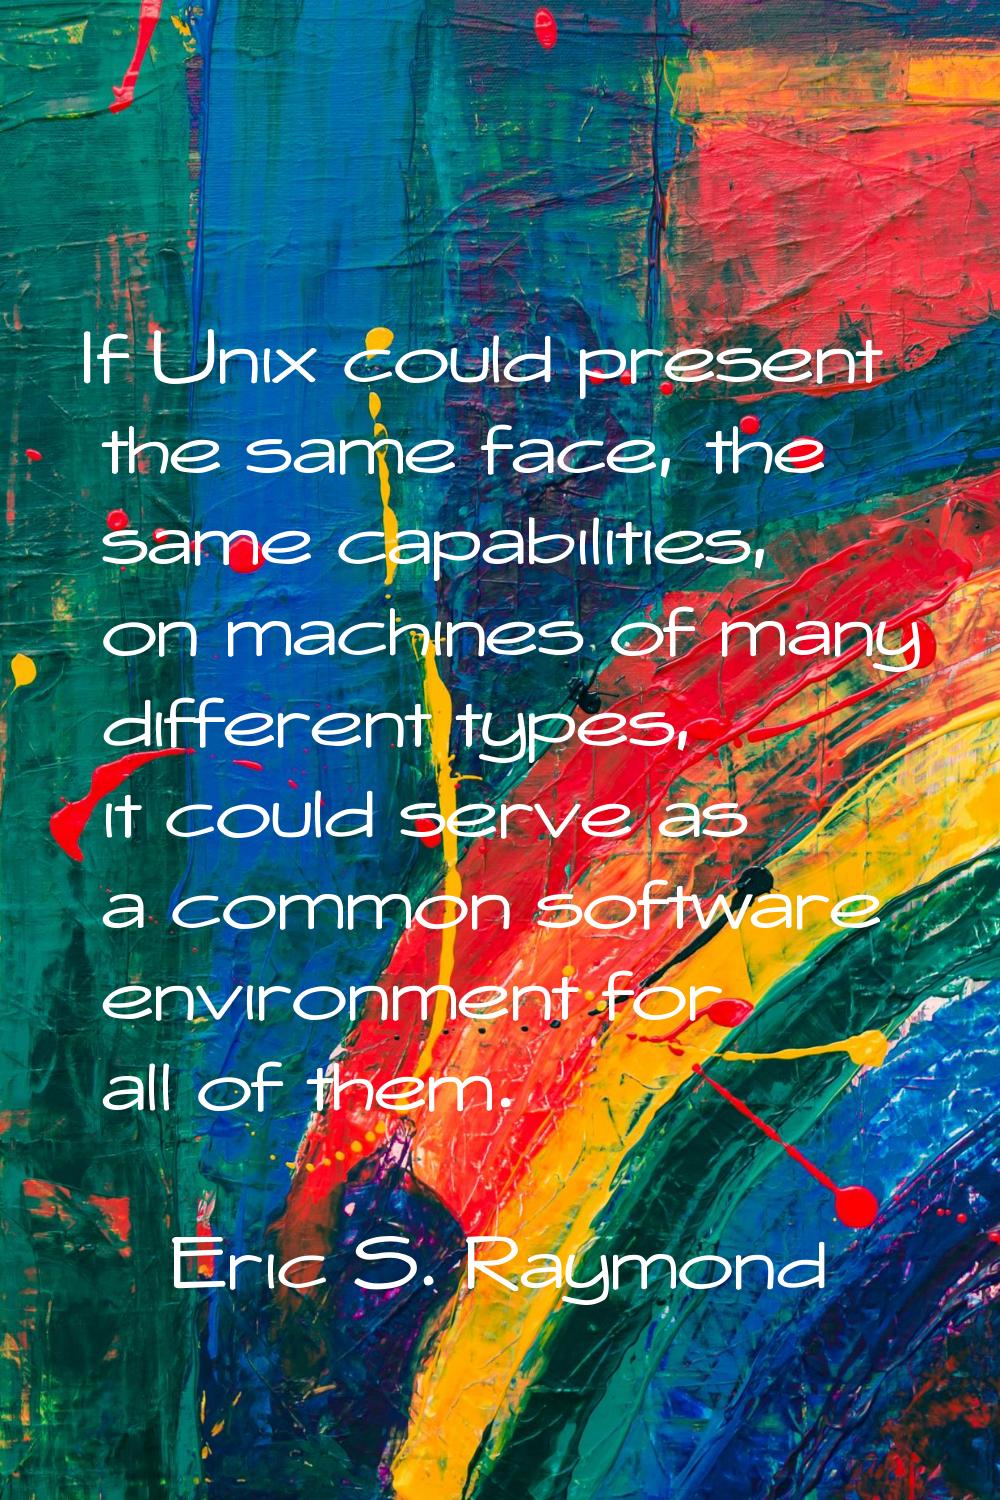 If Unix could present the same face, the same capabilities, on machines of many different types, it